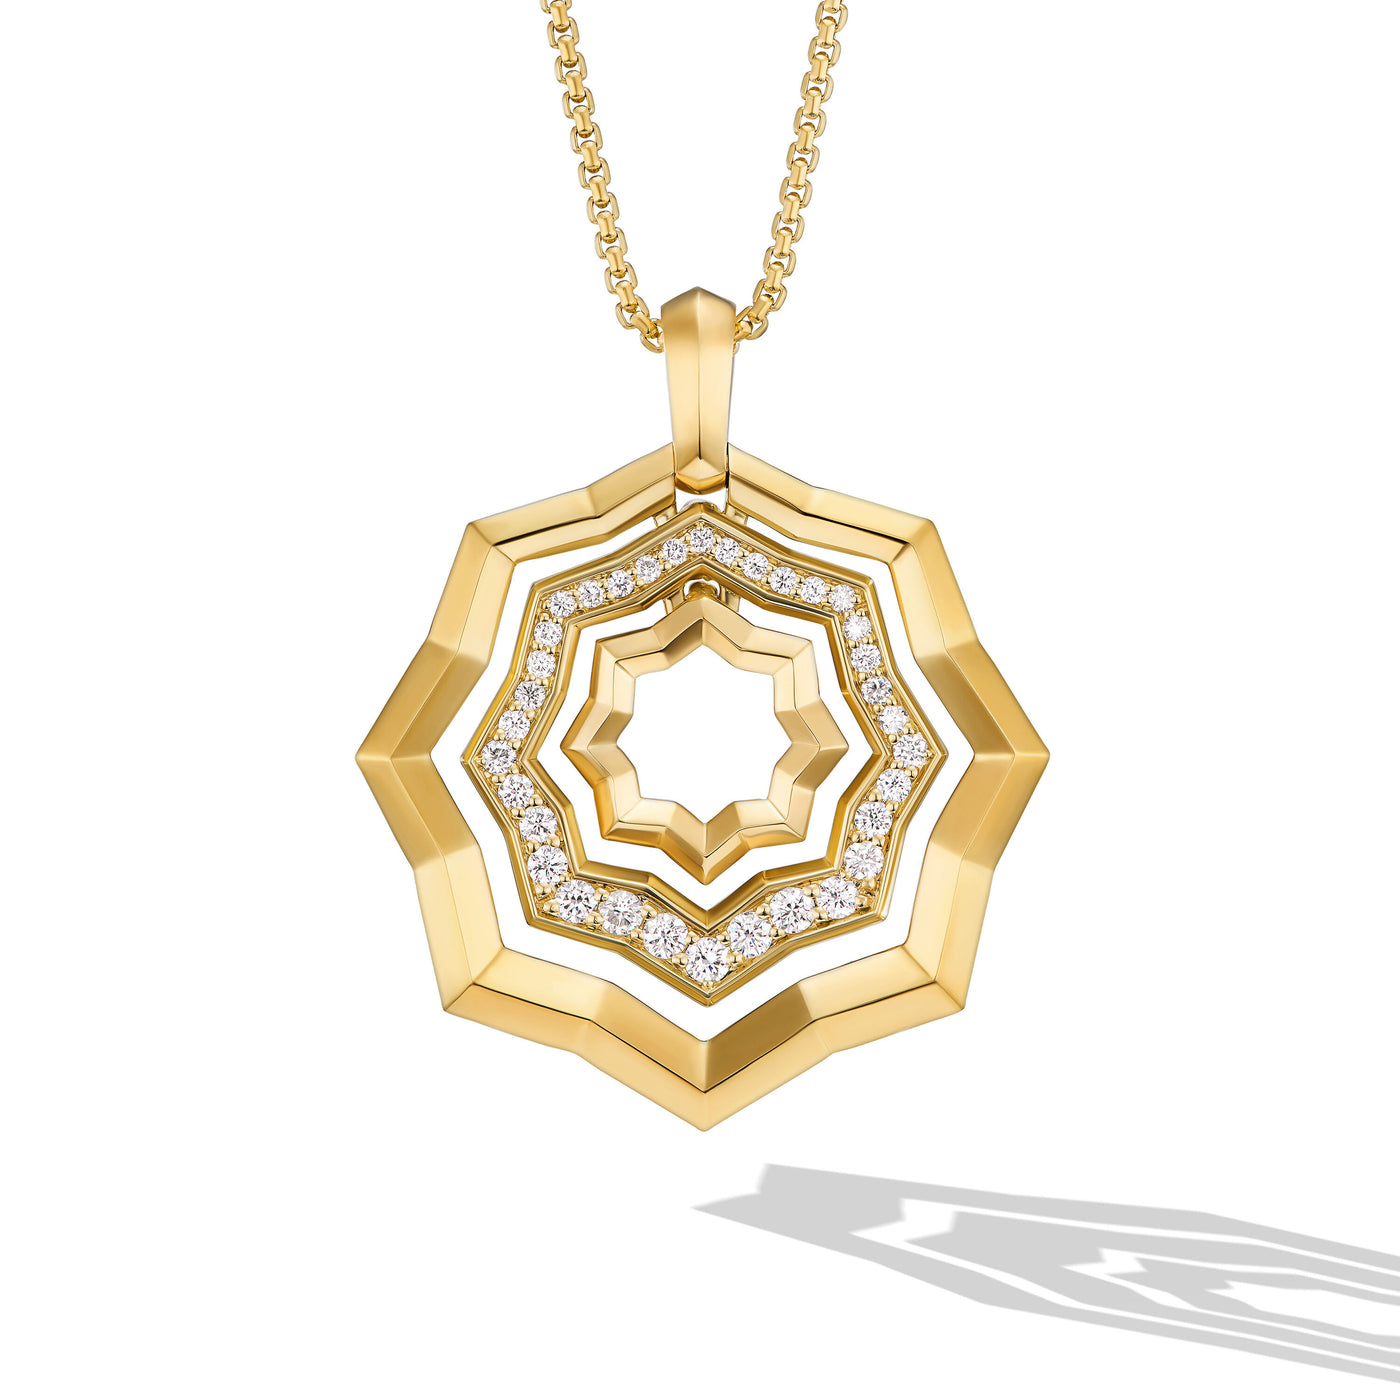 Stax Zig Zag Pendant Necklace in 18K Yellow Gold with Diamonds\, 28mm